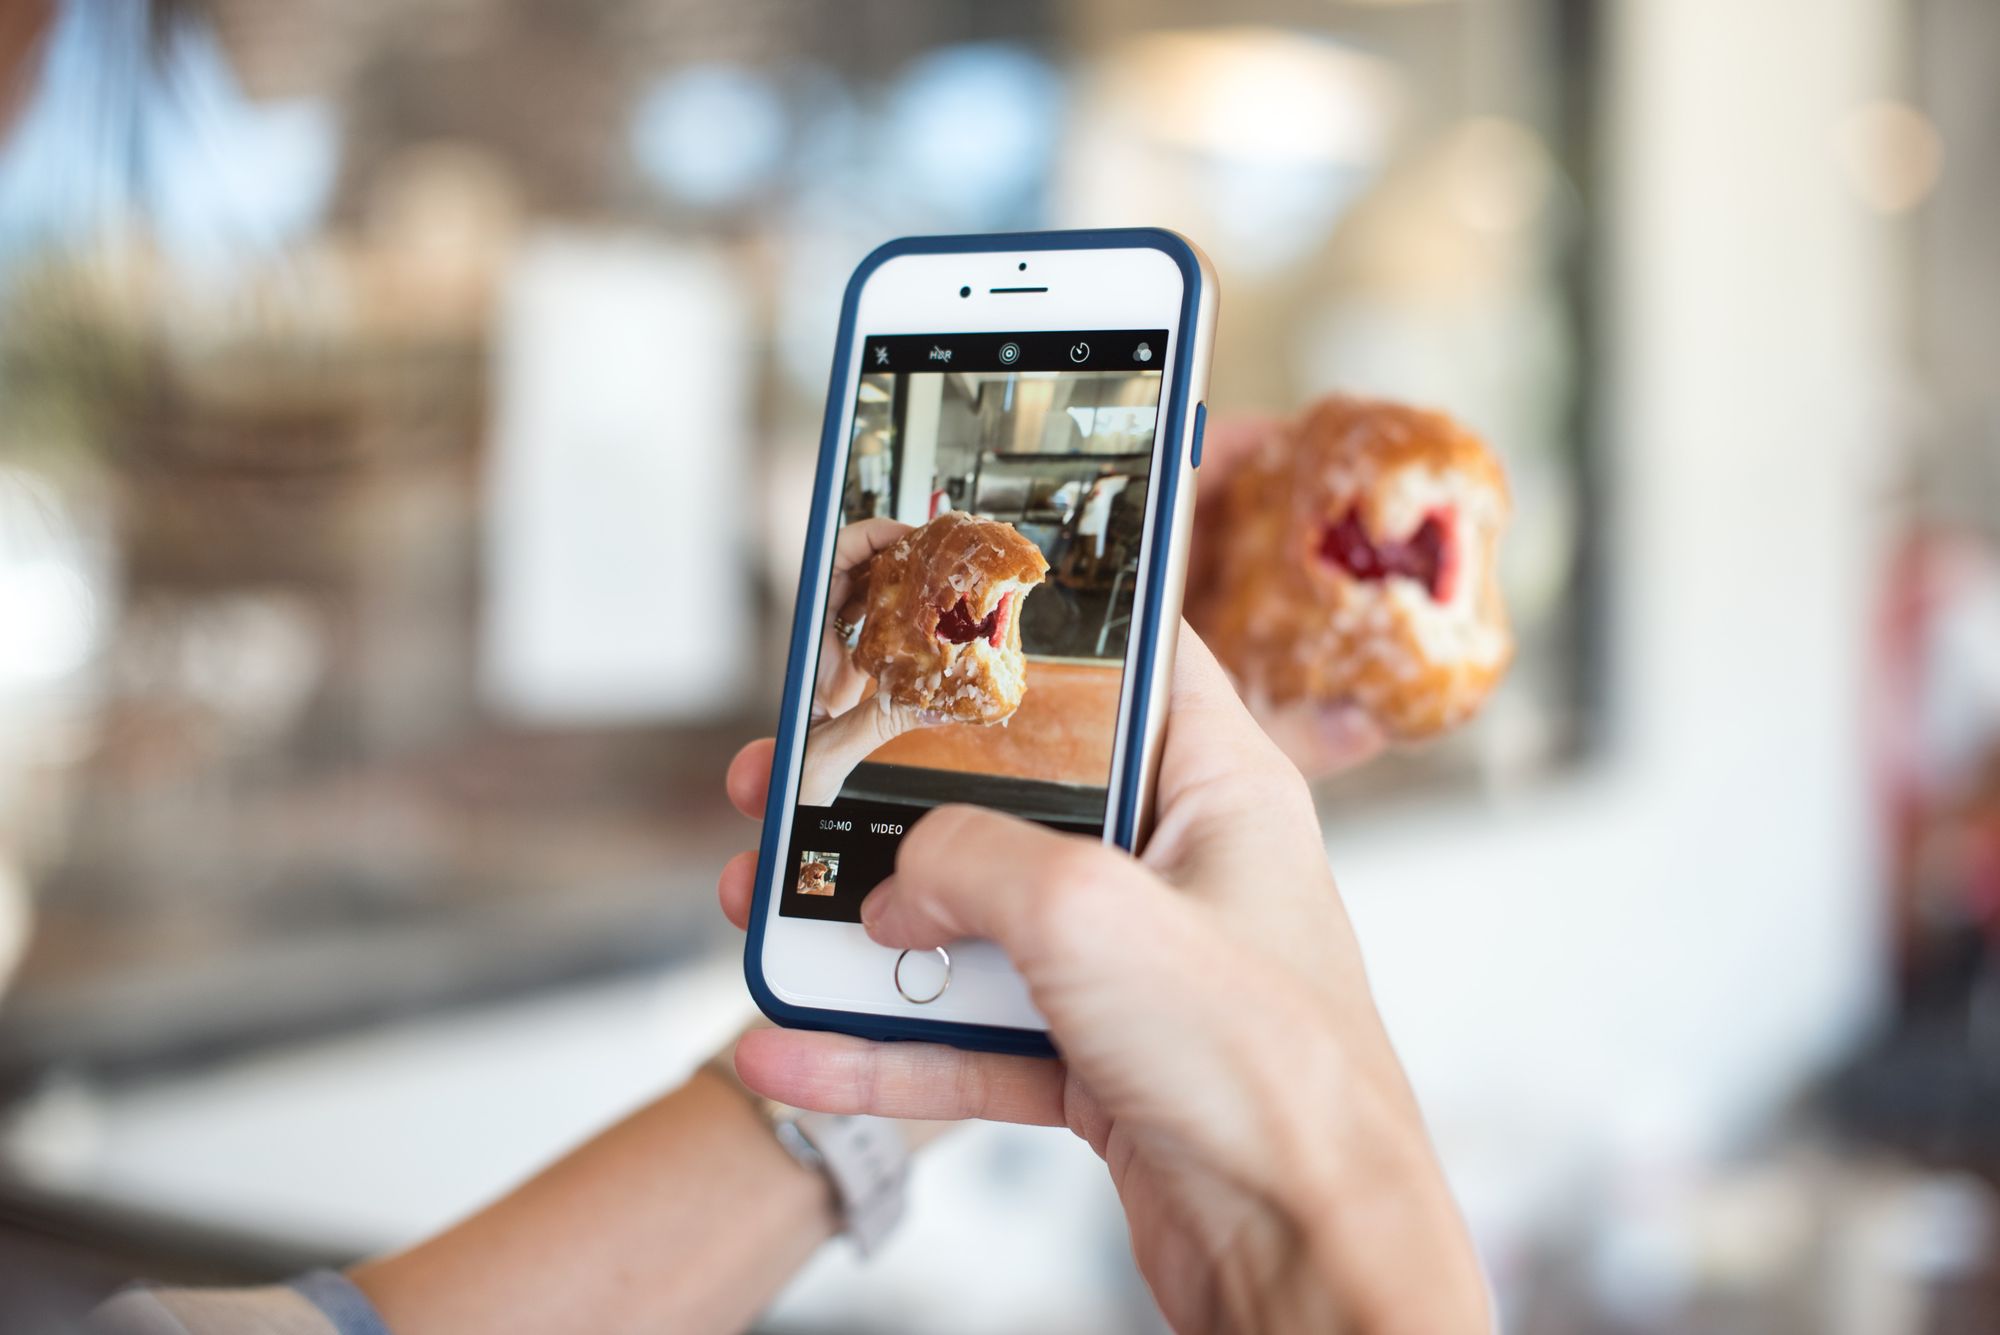 6 Instagram Story Ideas To Try Out for Your Next Post